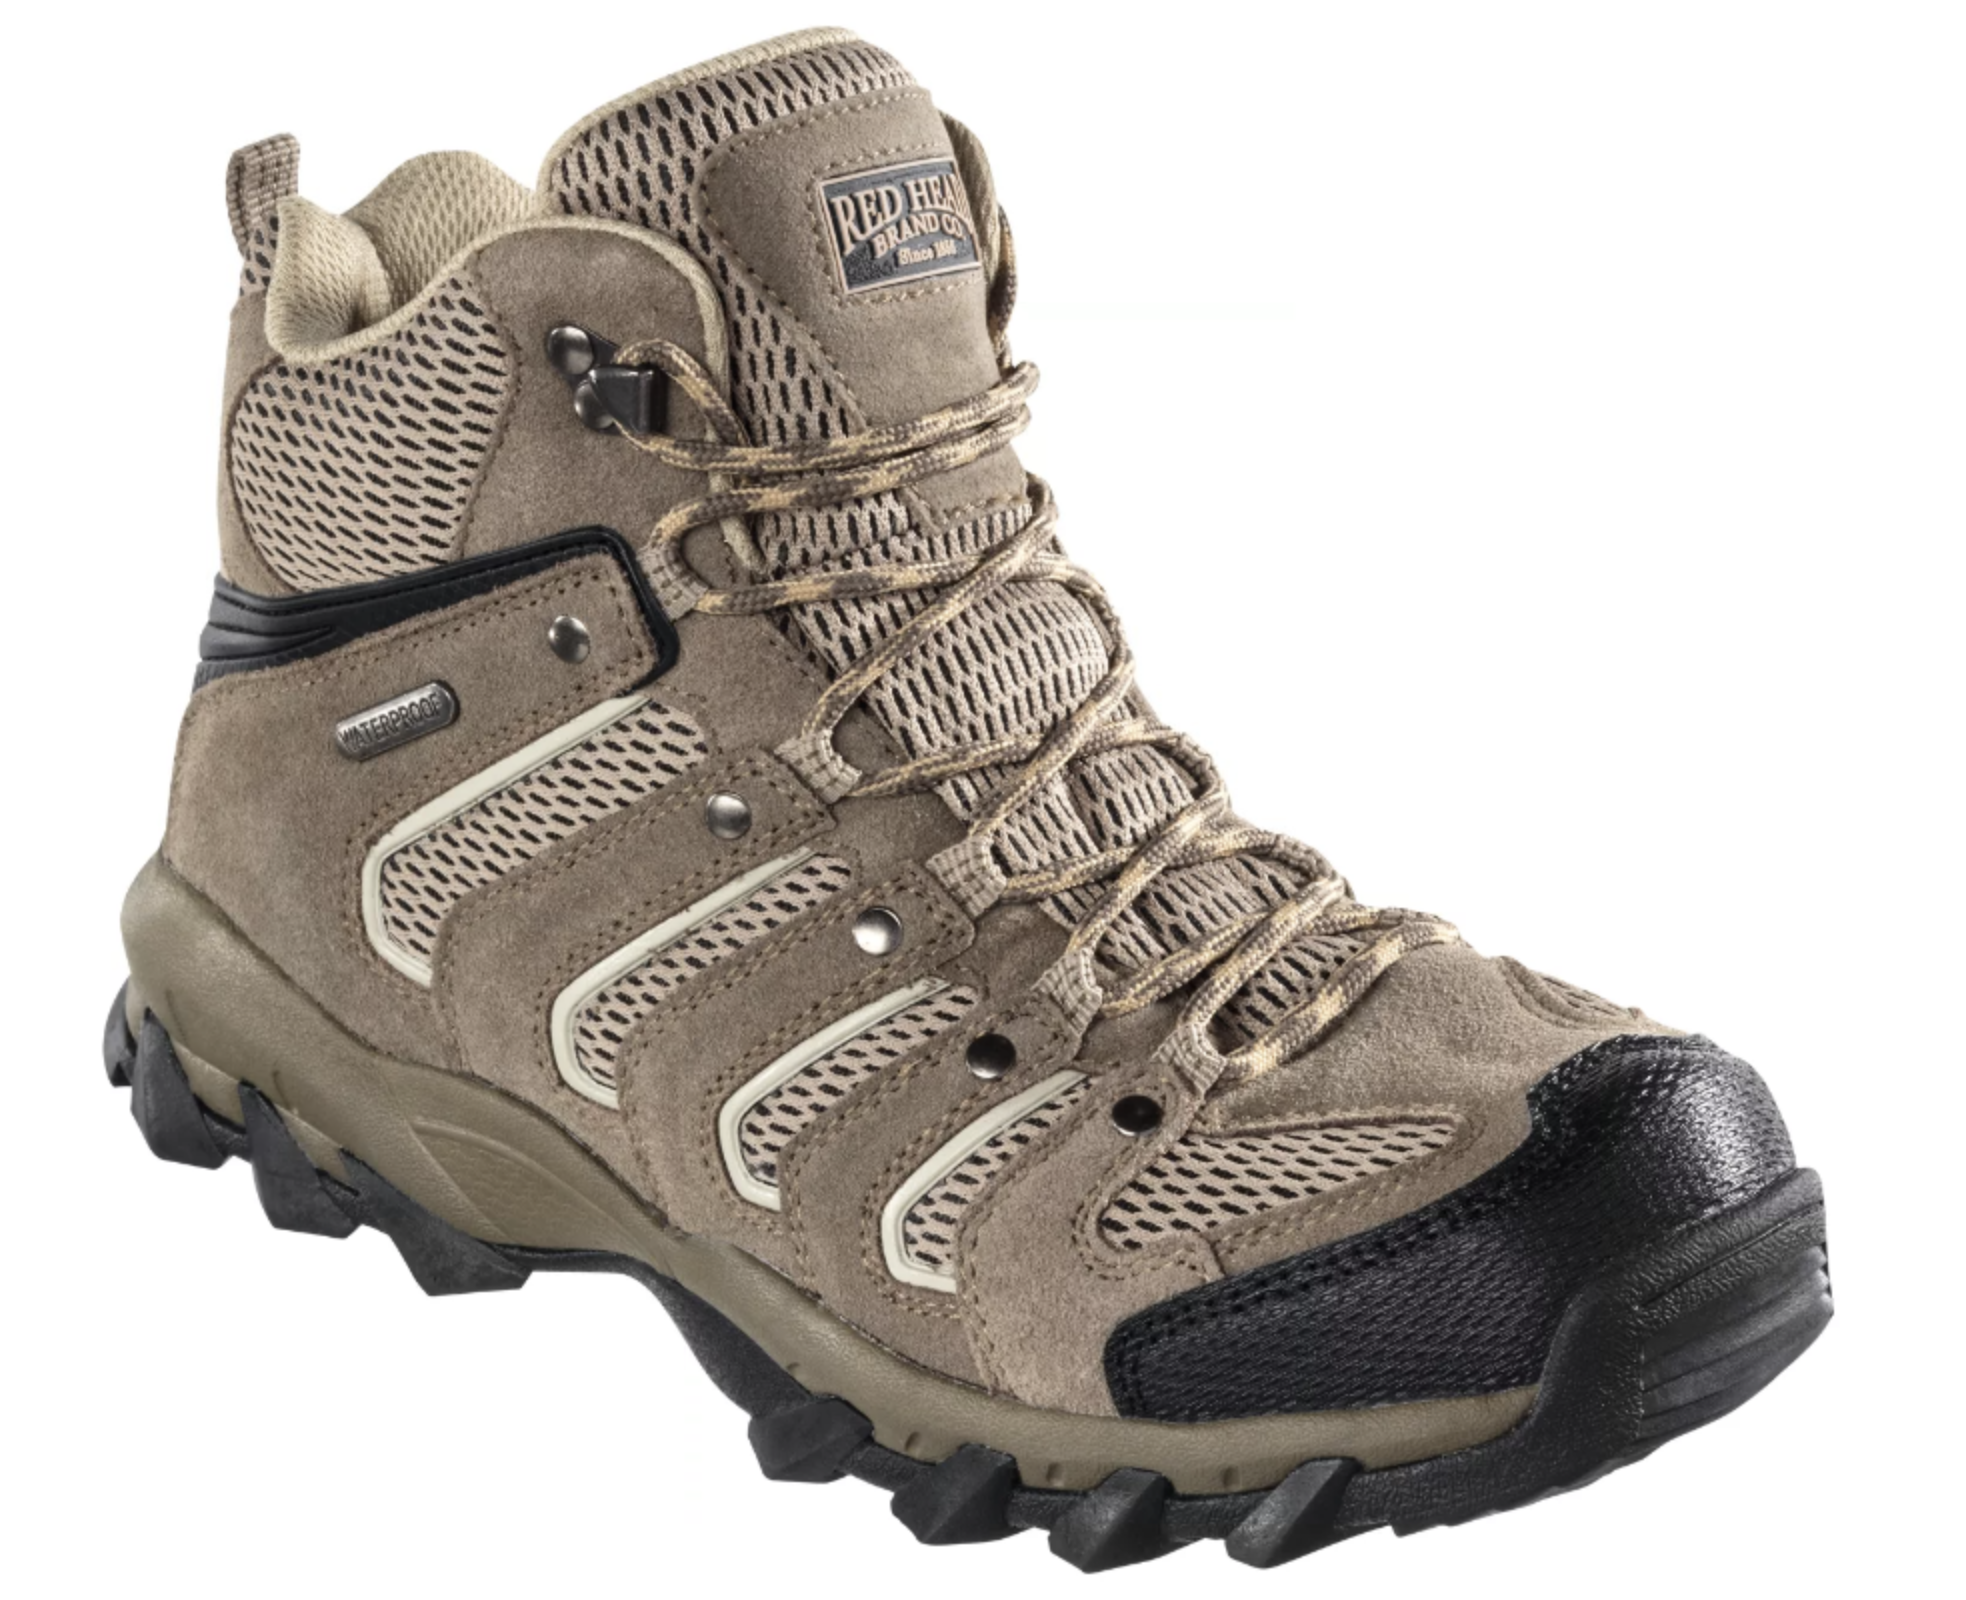 the hiking boot